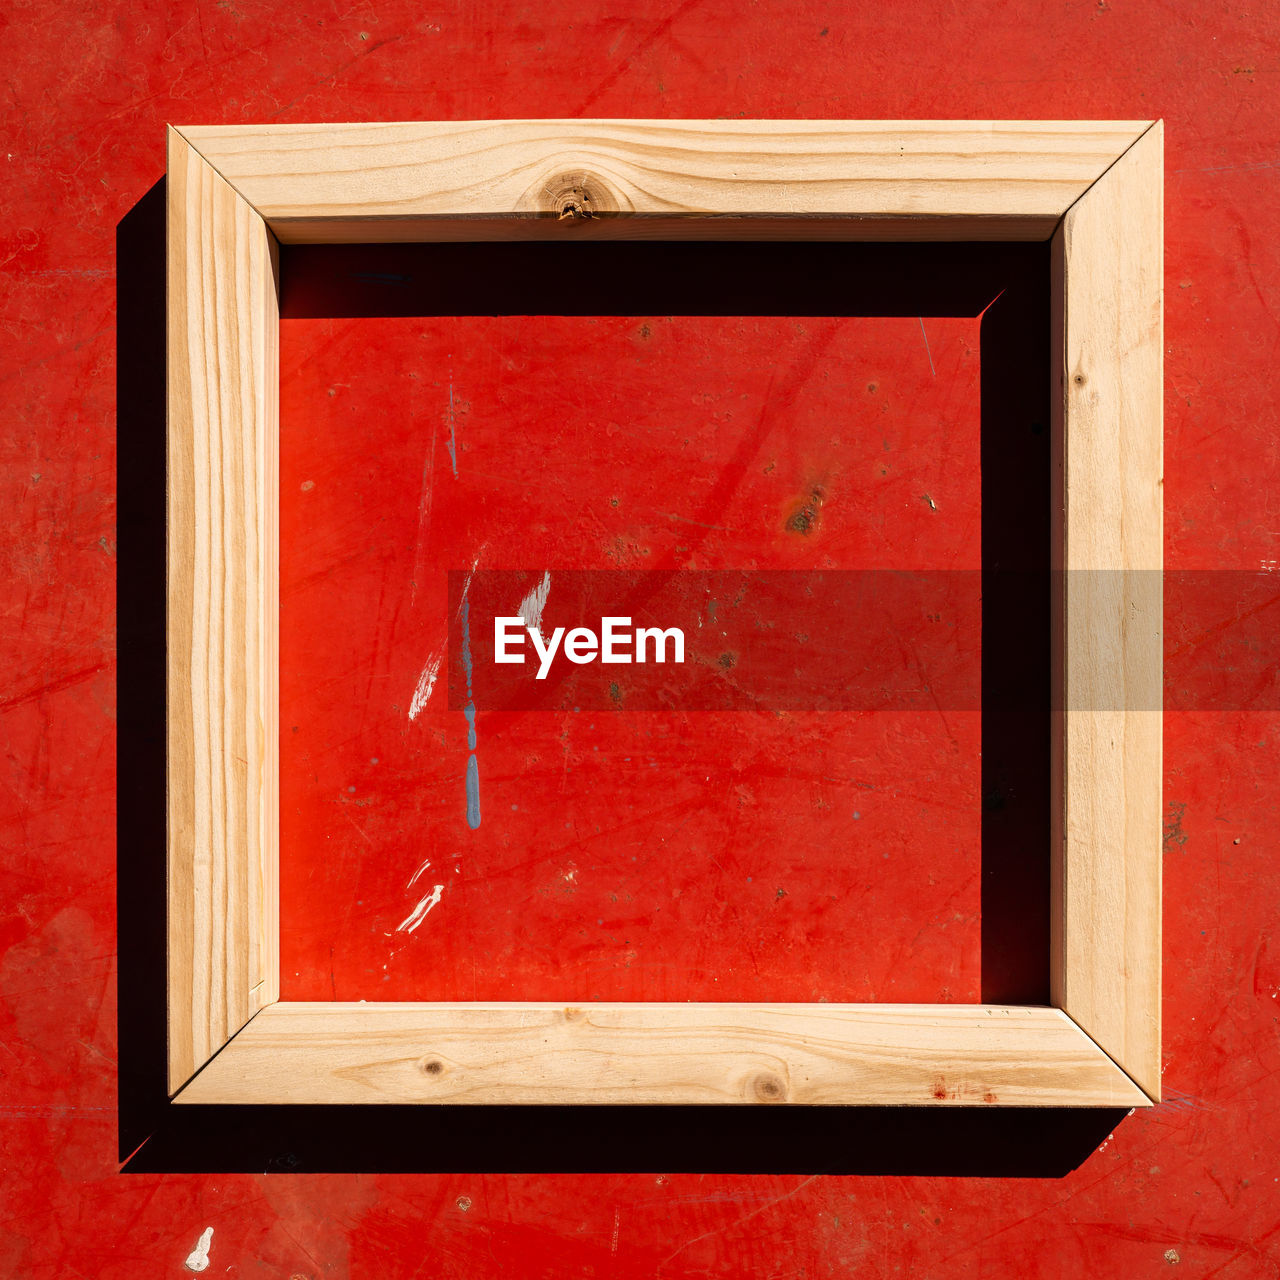 Vlose-up square empty wooden frame against rusty shabby chic background